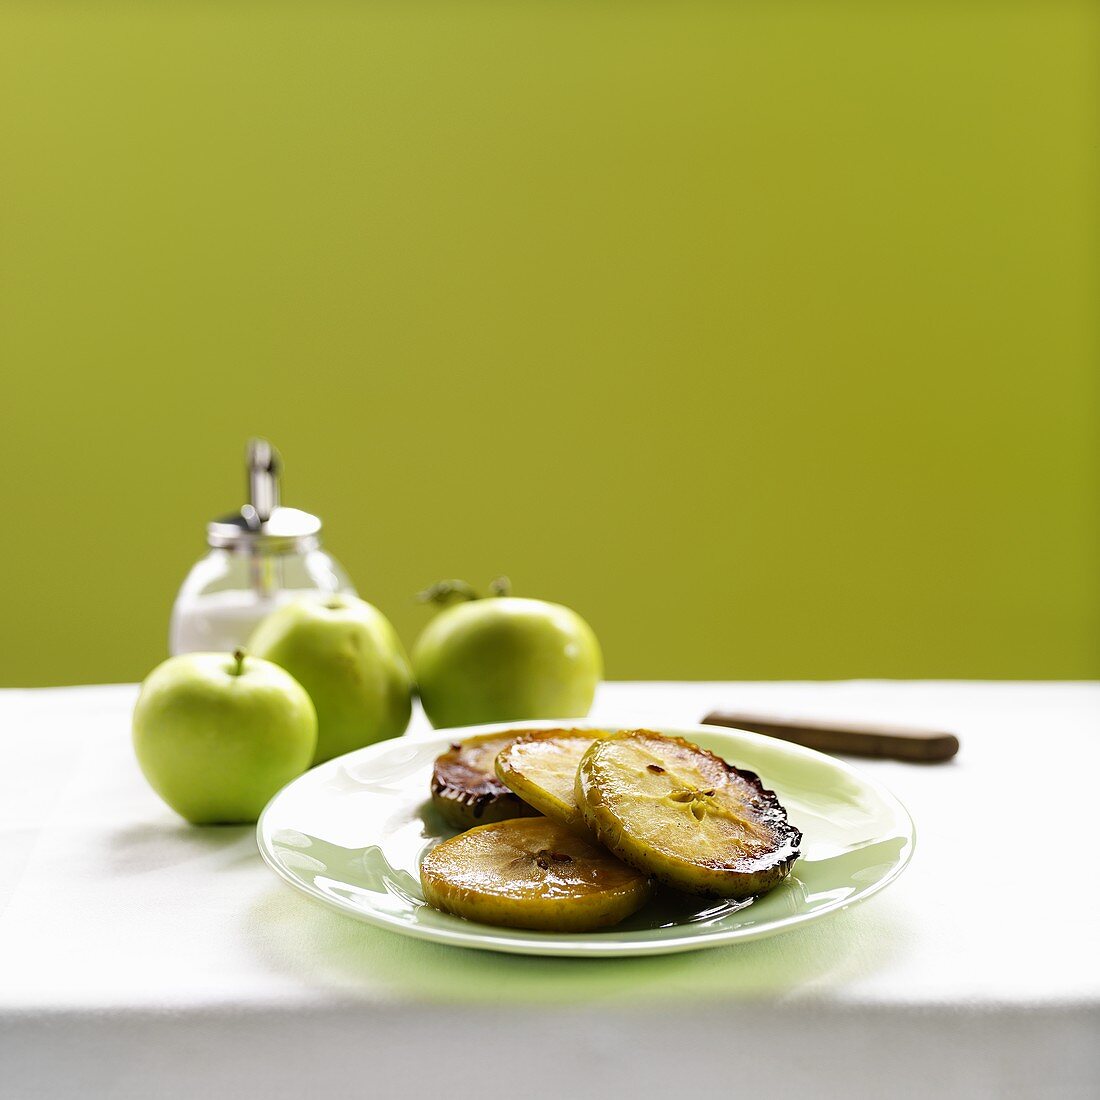 Slices of Baked Apple on a Plate with Fresh Whole Apples